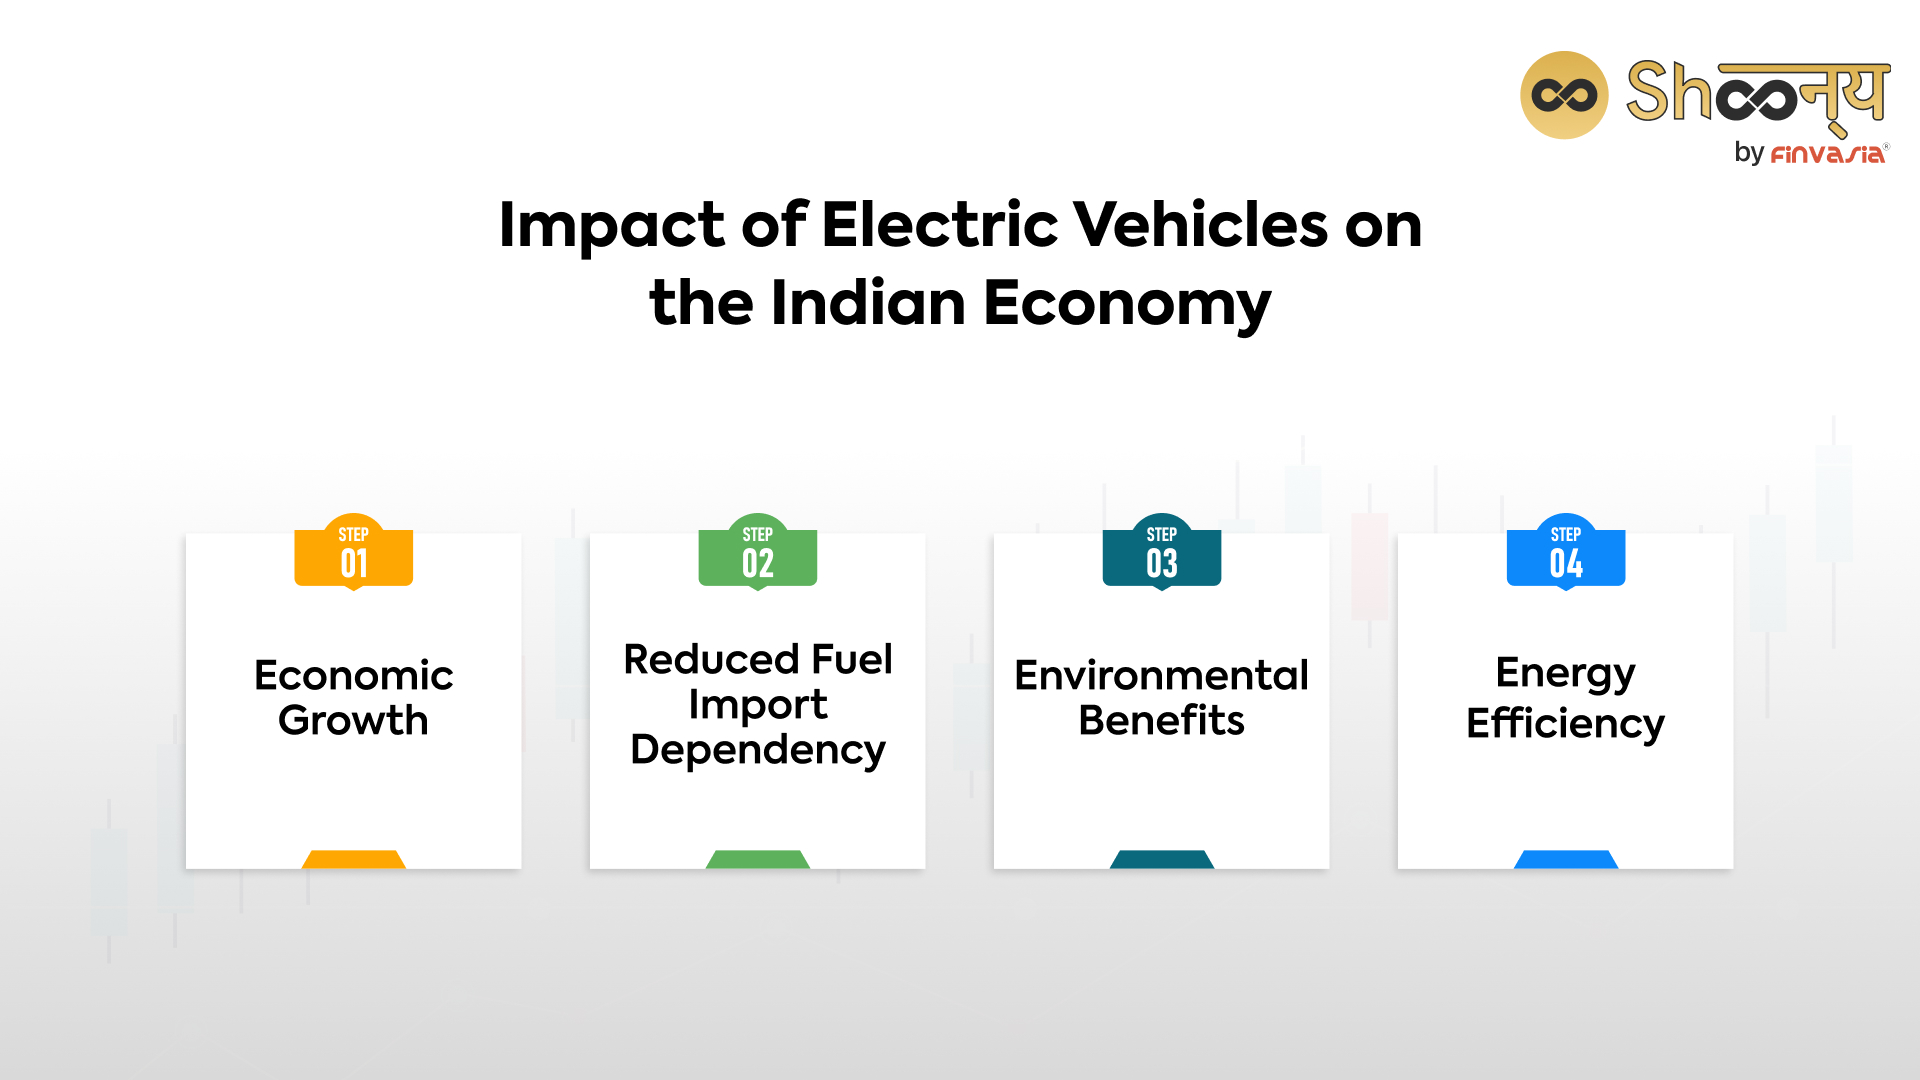 Impact of Electric Vehicles on the Indian Economy
